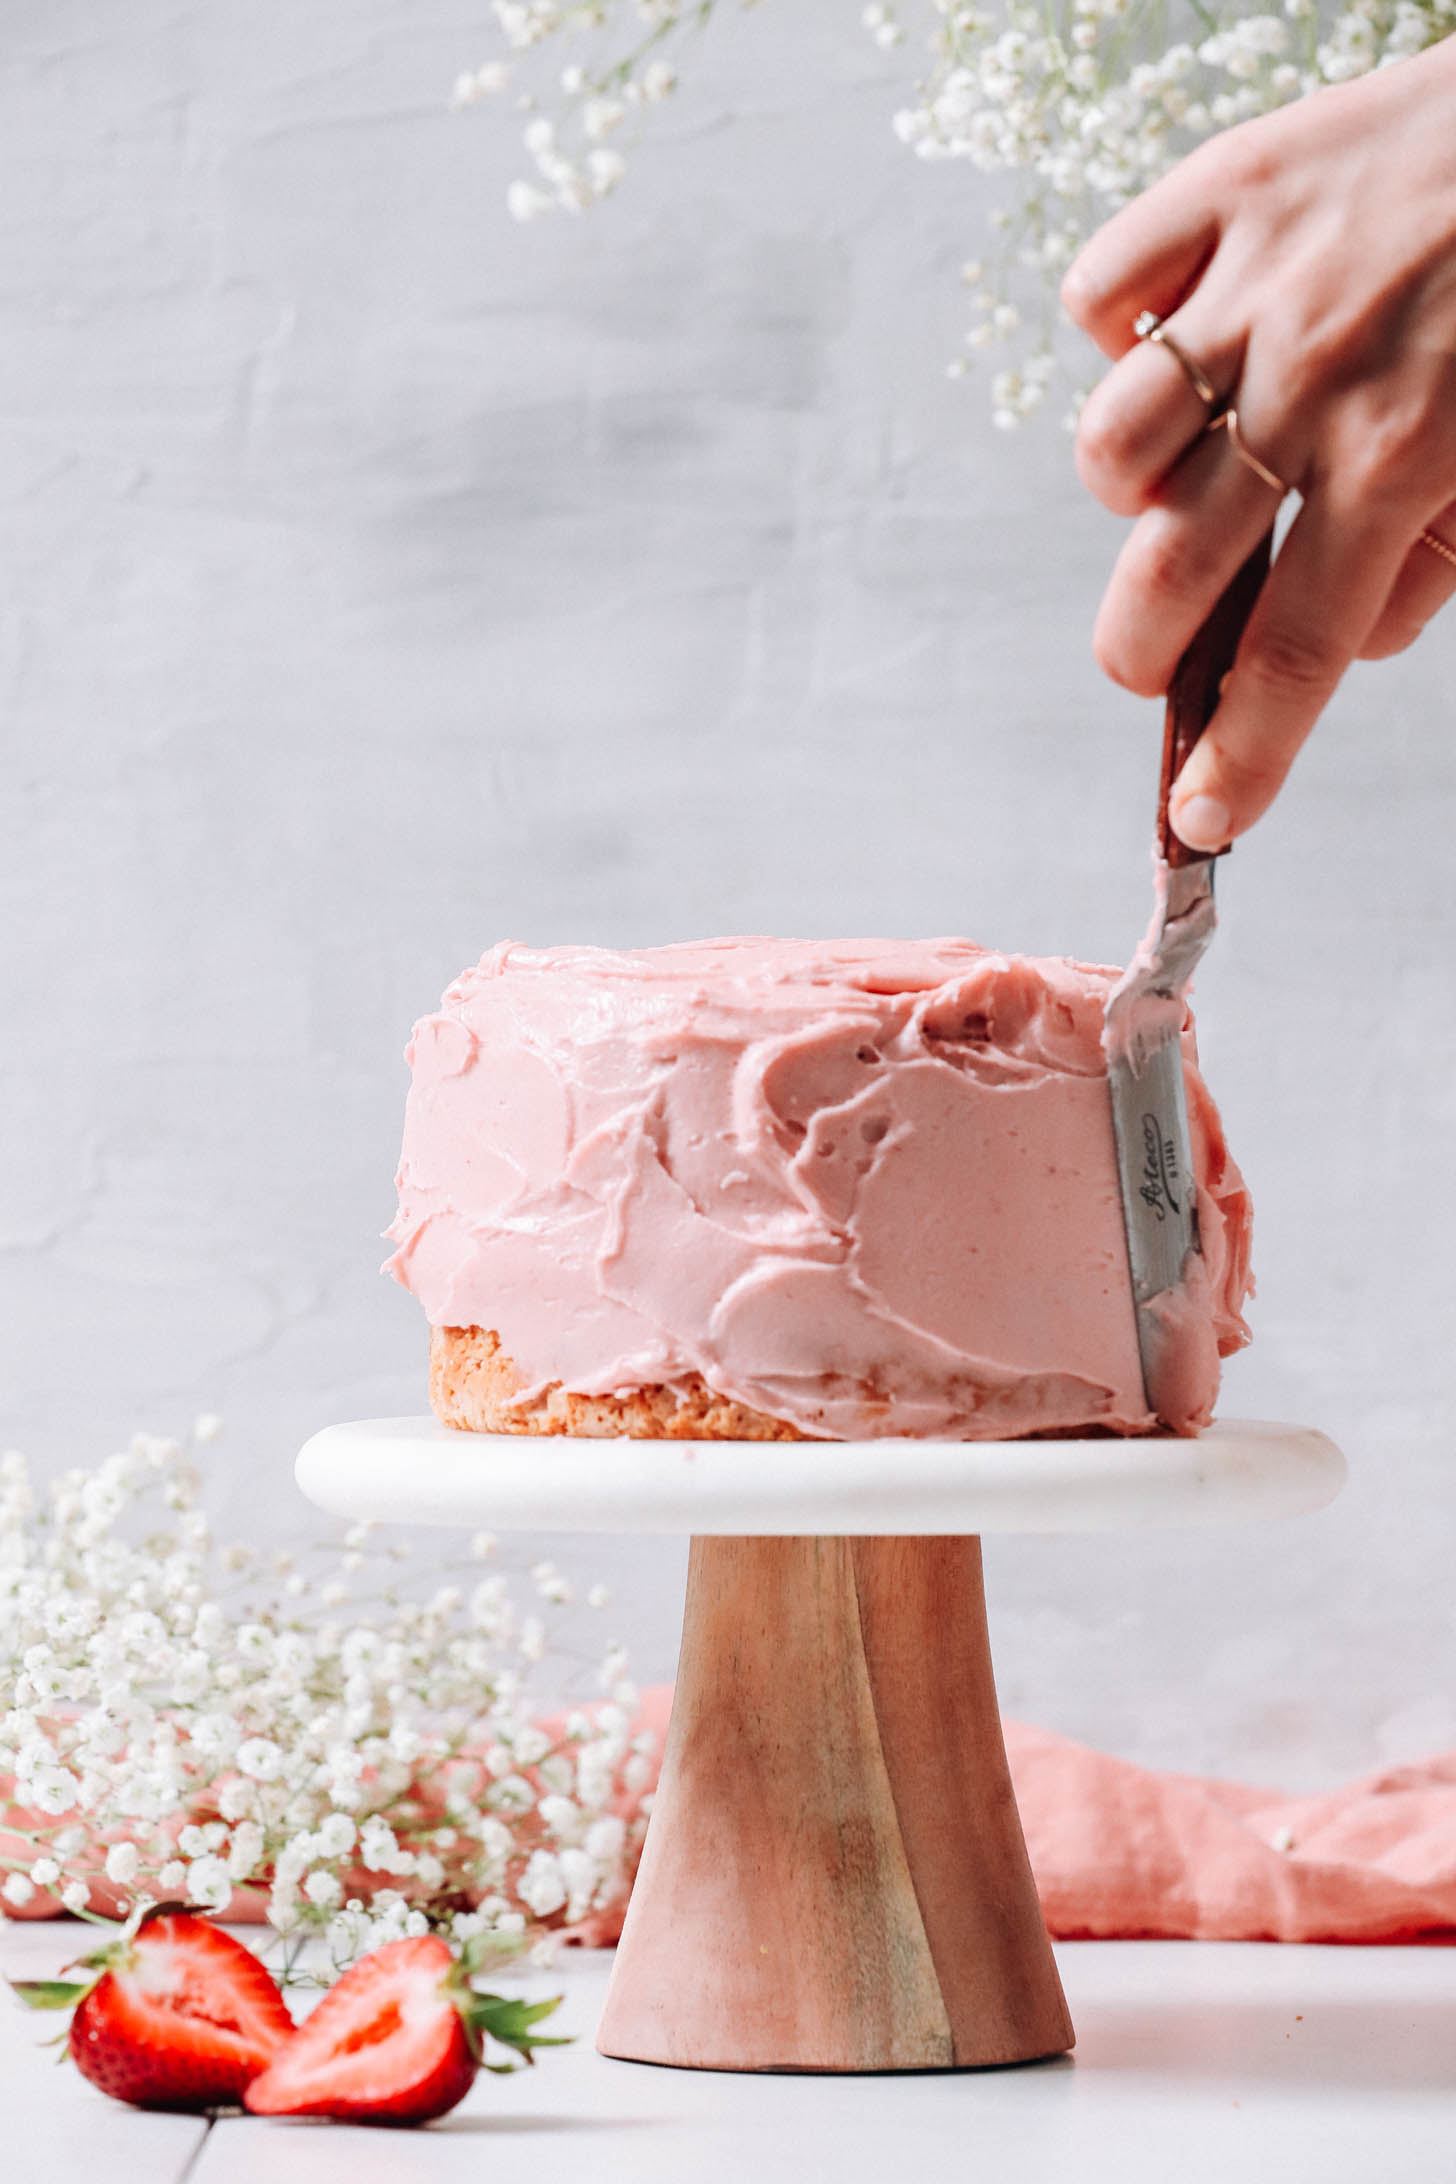 Spreading strawberry frosting on a cake